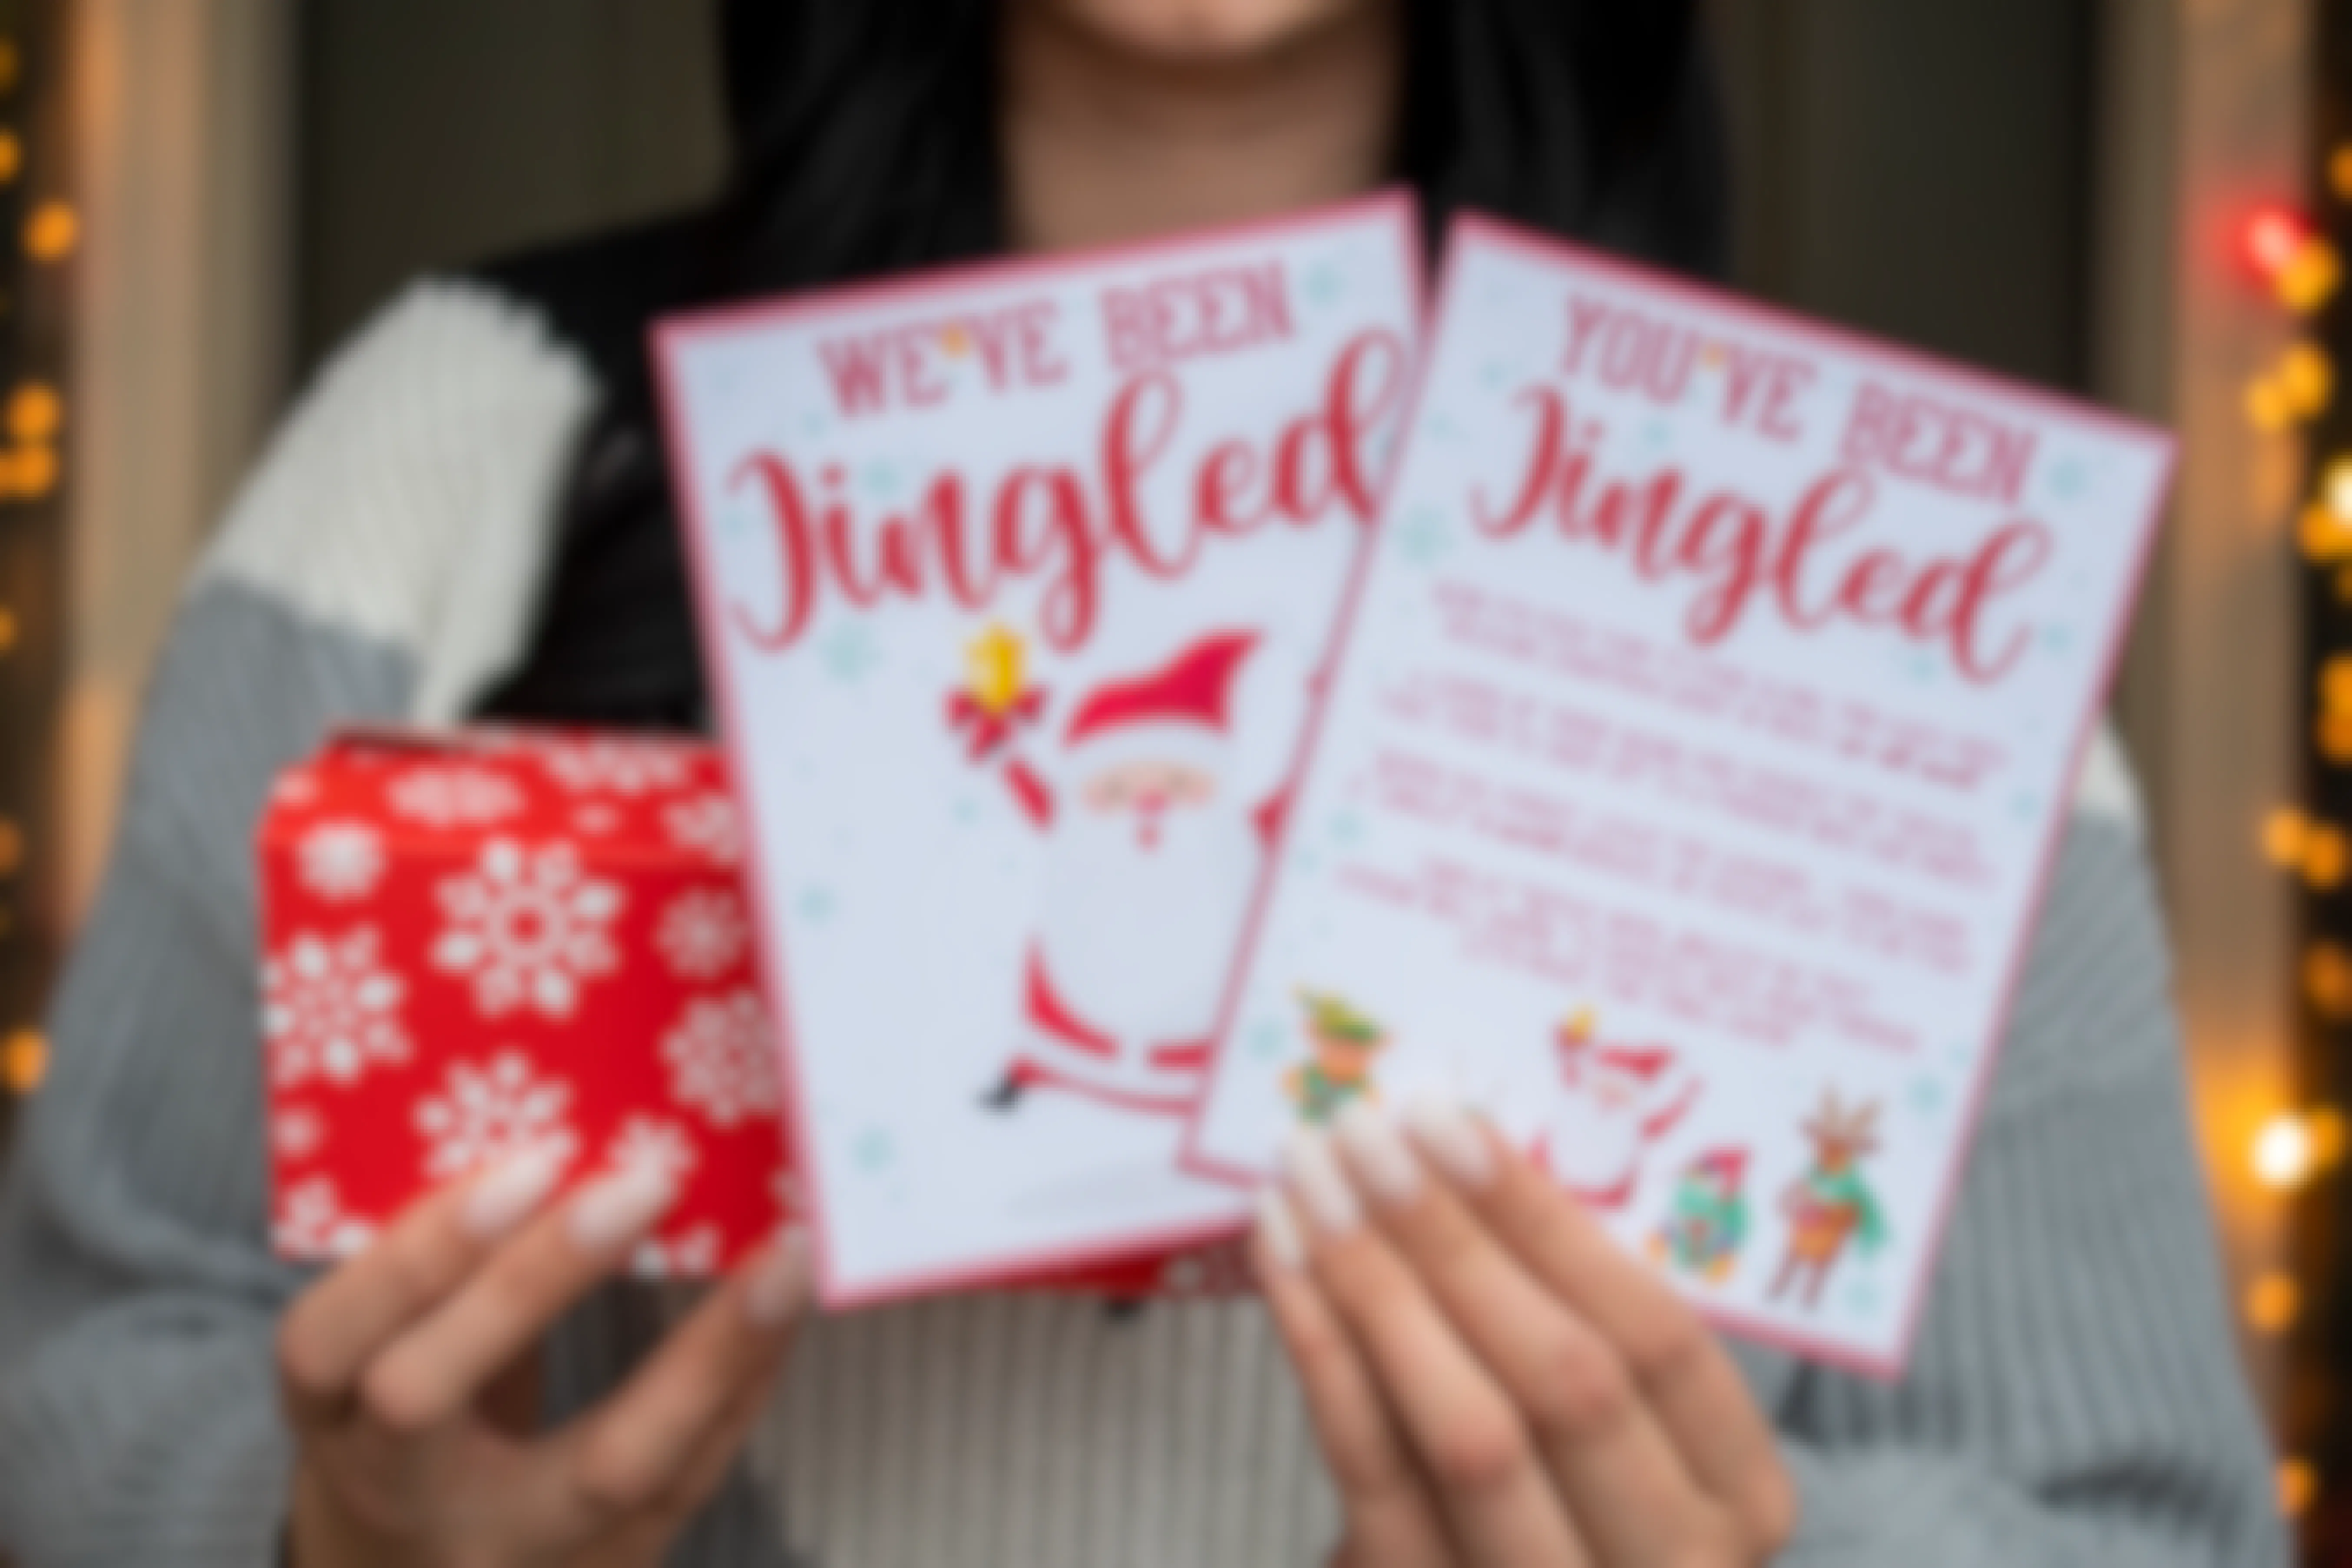 Someone holding a wrapped present and two cards, one saying "we've been jingled" and the other saying, "you've been jingled" with an explanation of the game